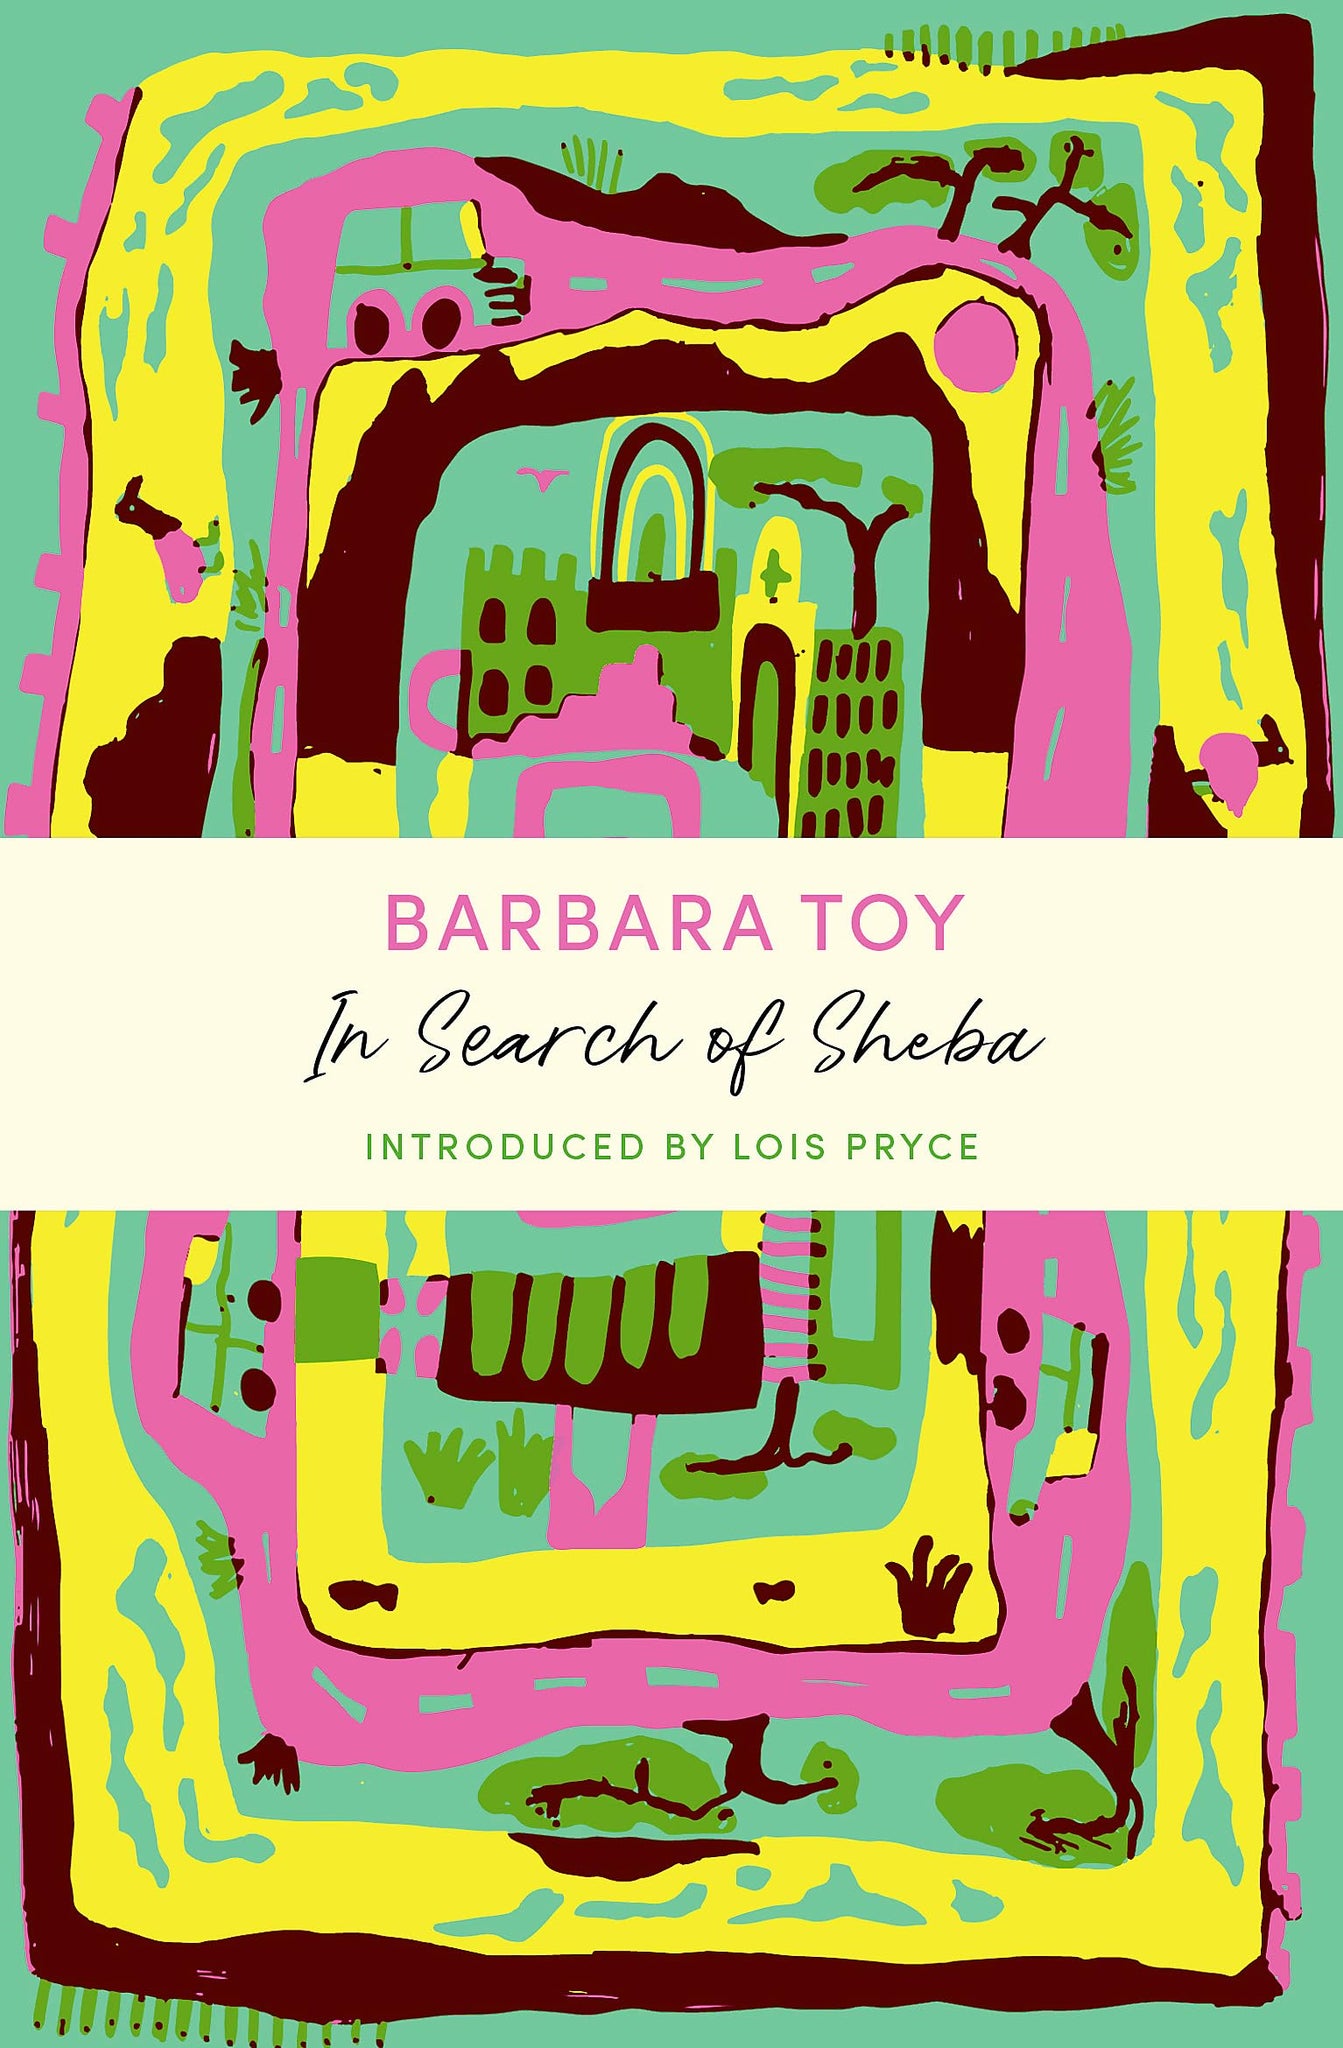 In Search of Sheba